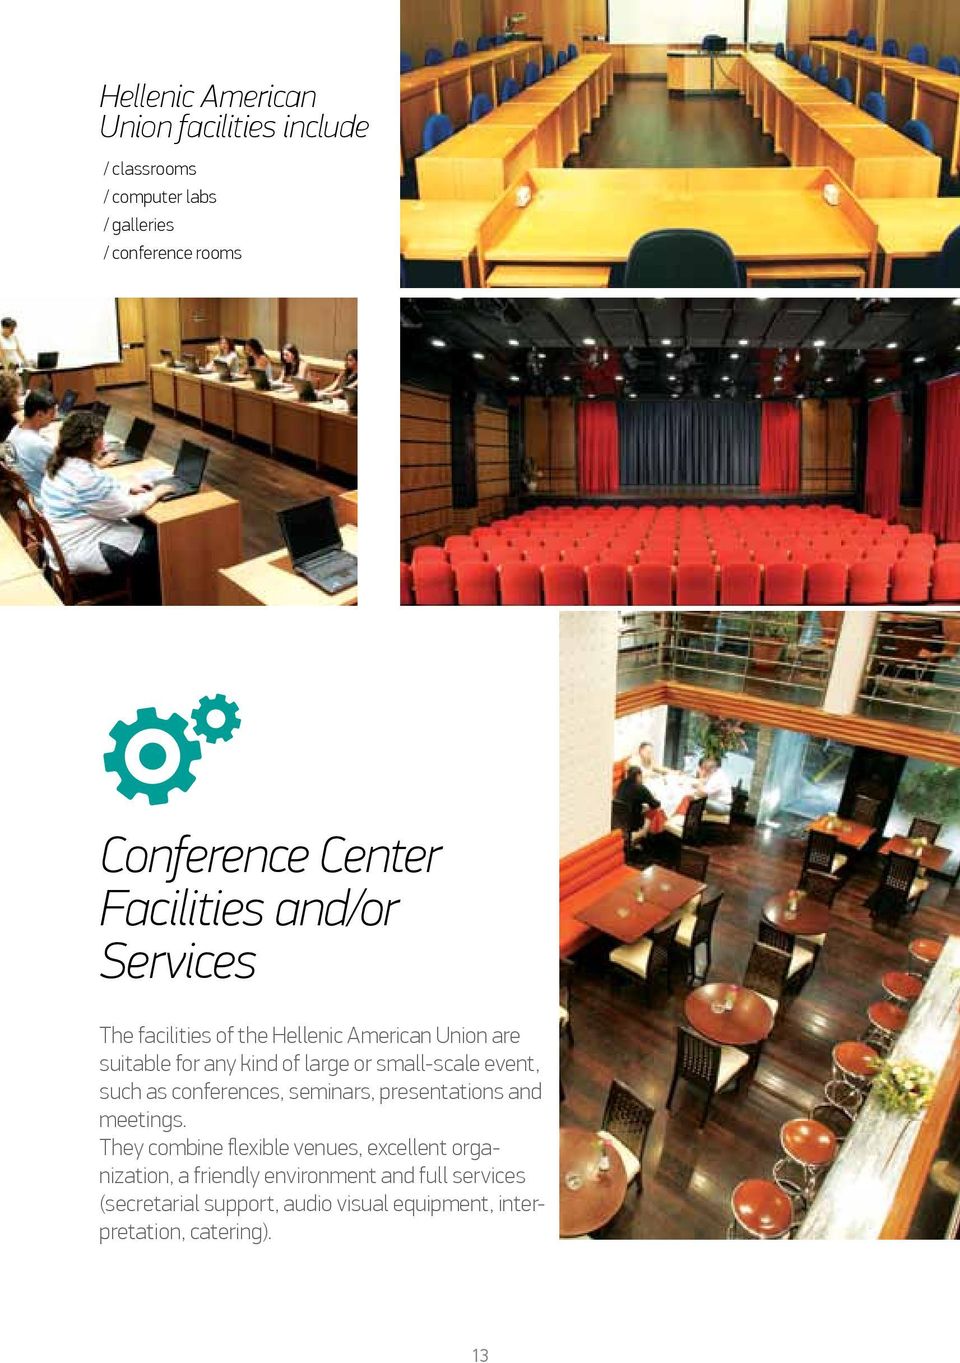 small-scale event, such as conferences, seminars, presentations and meetings.